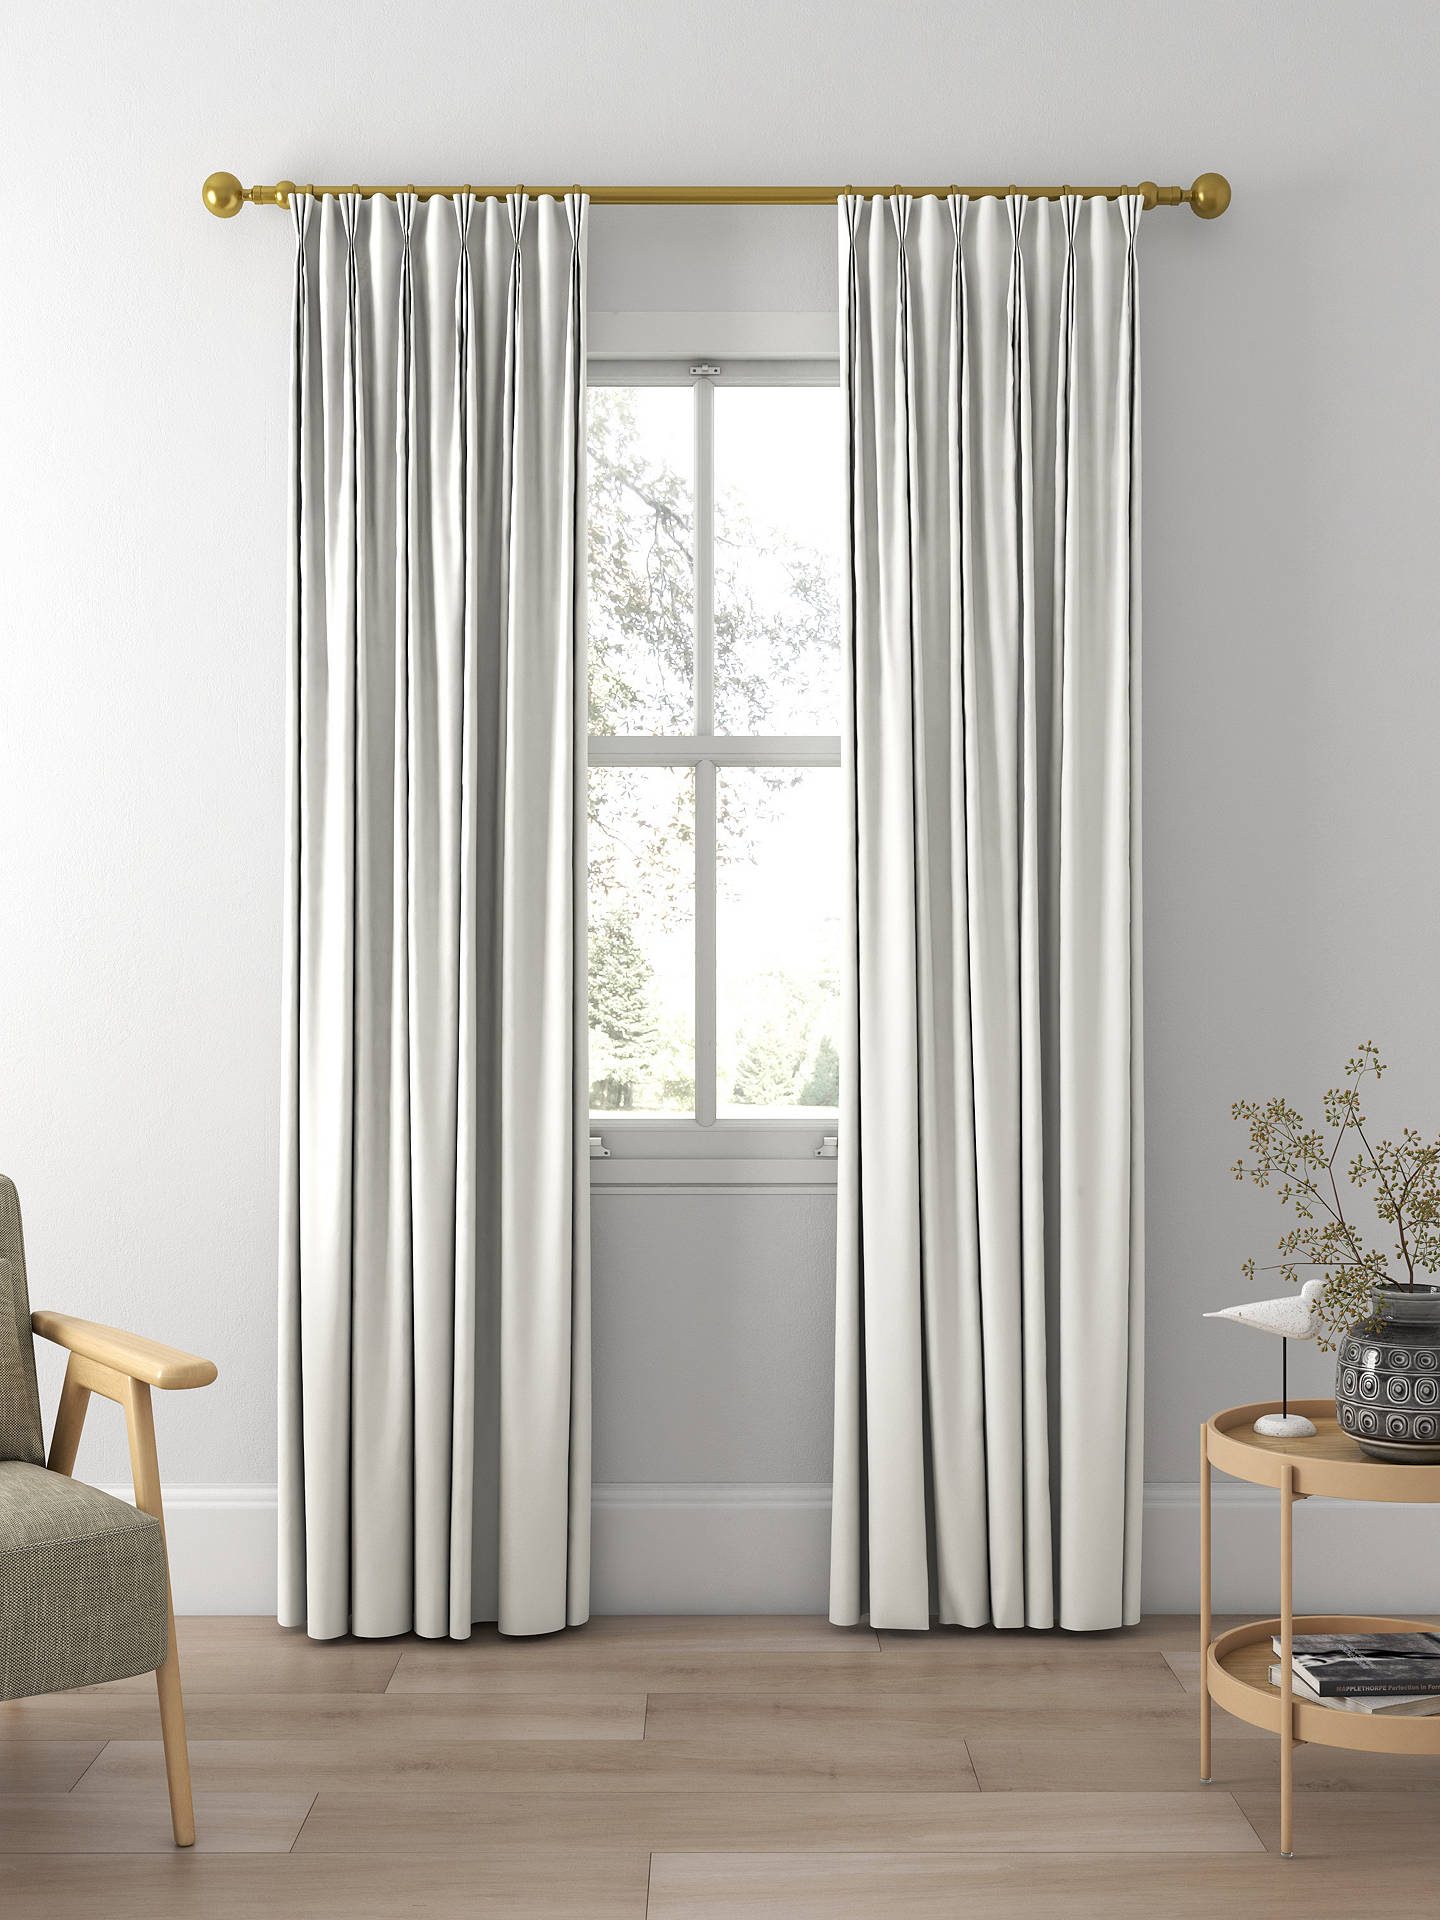 John Lewis John Lewis Recycled Basketweave Pencil Pleat Unlined Curtains Marshmallow 